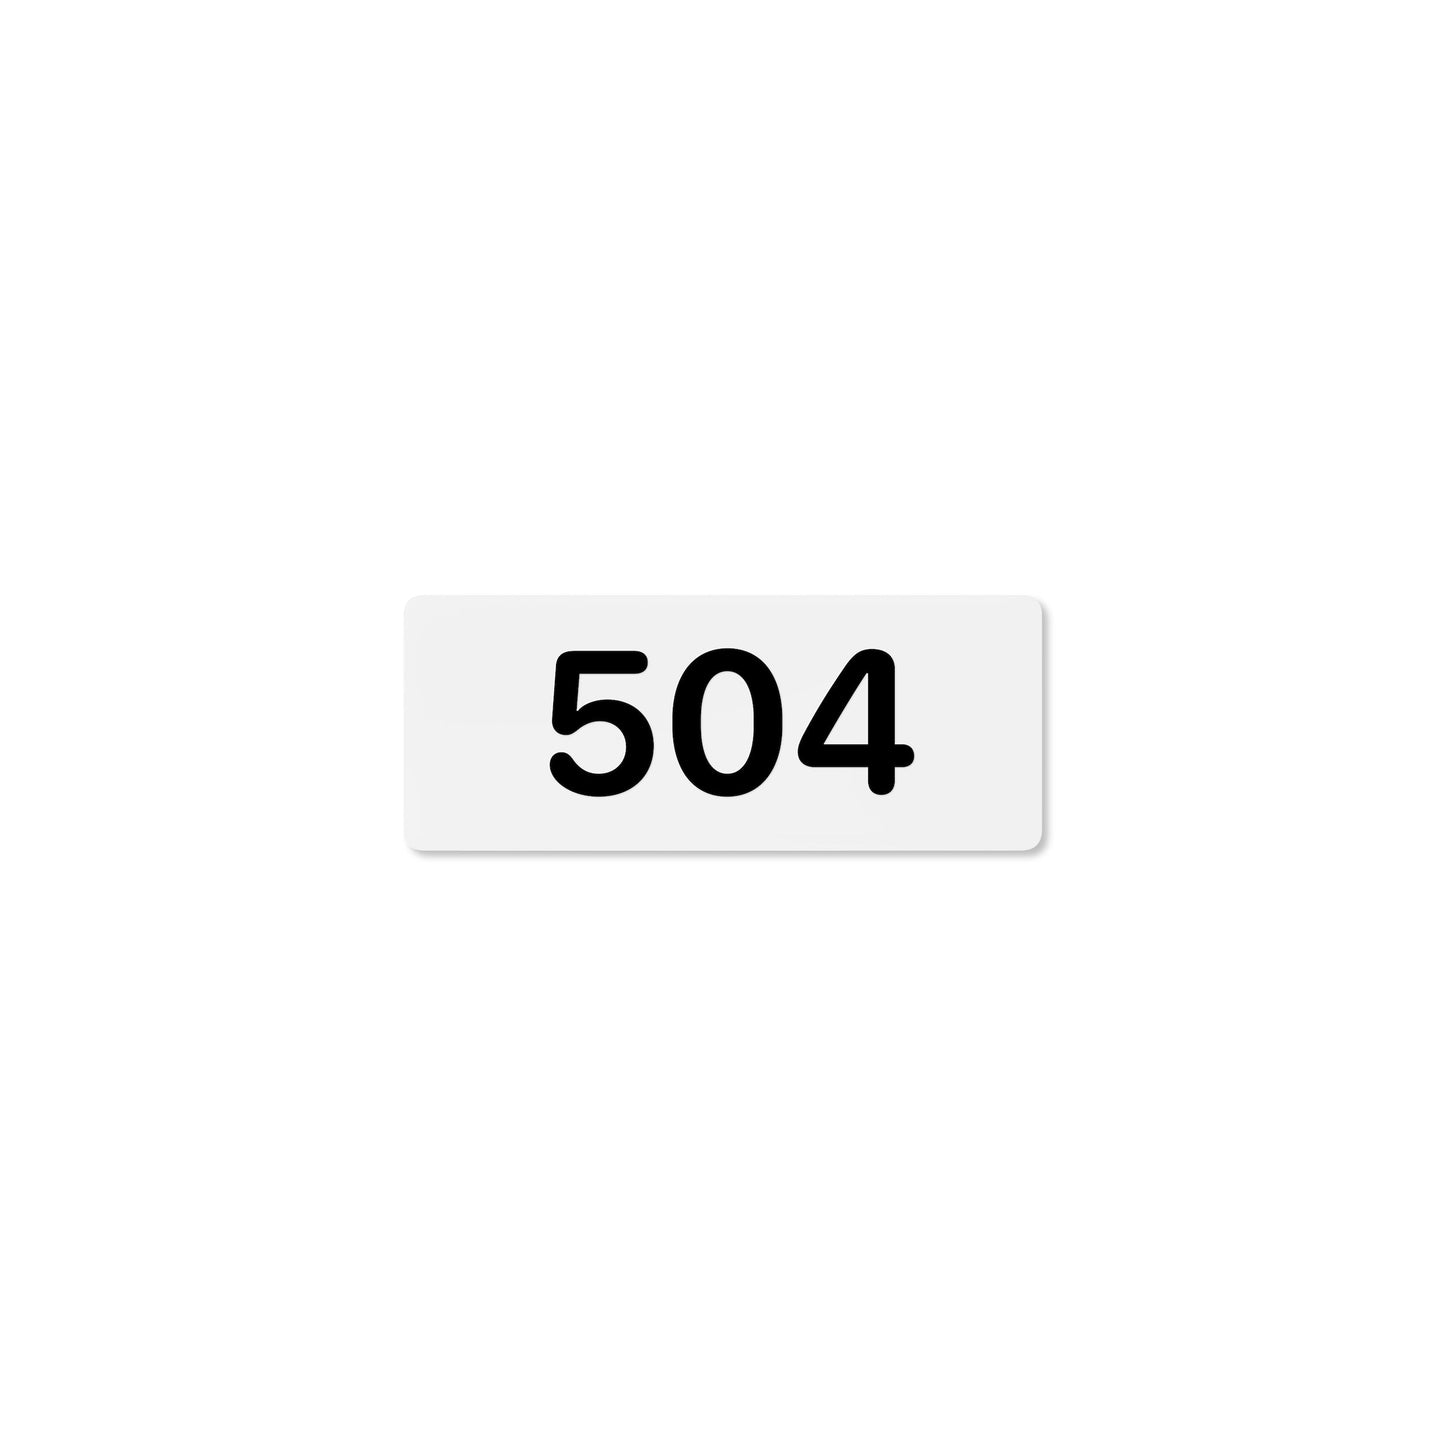 Numeral 504